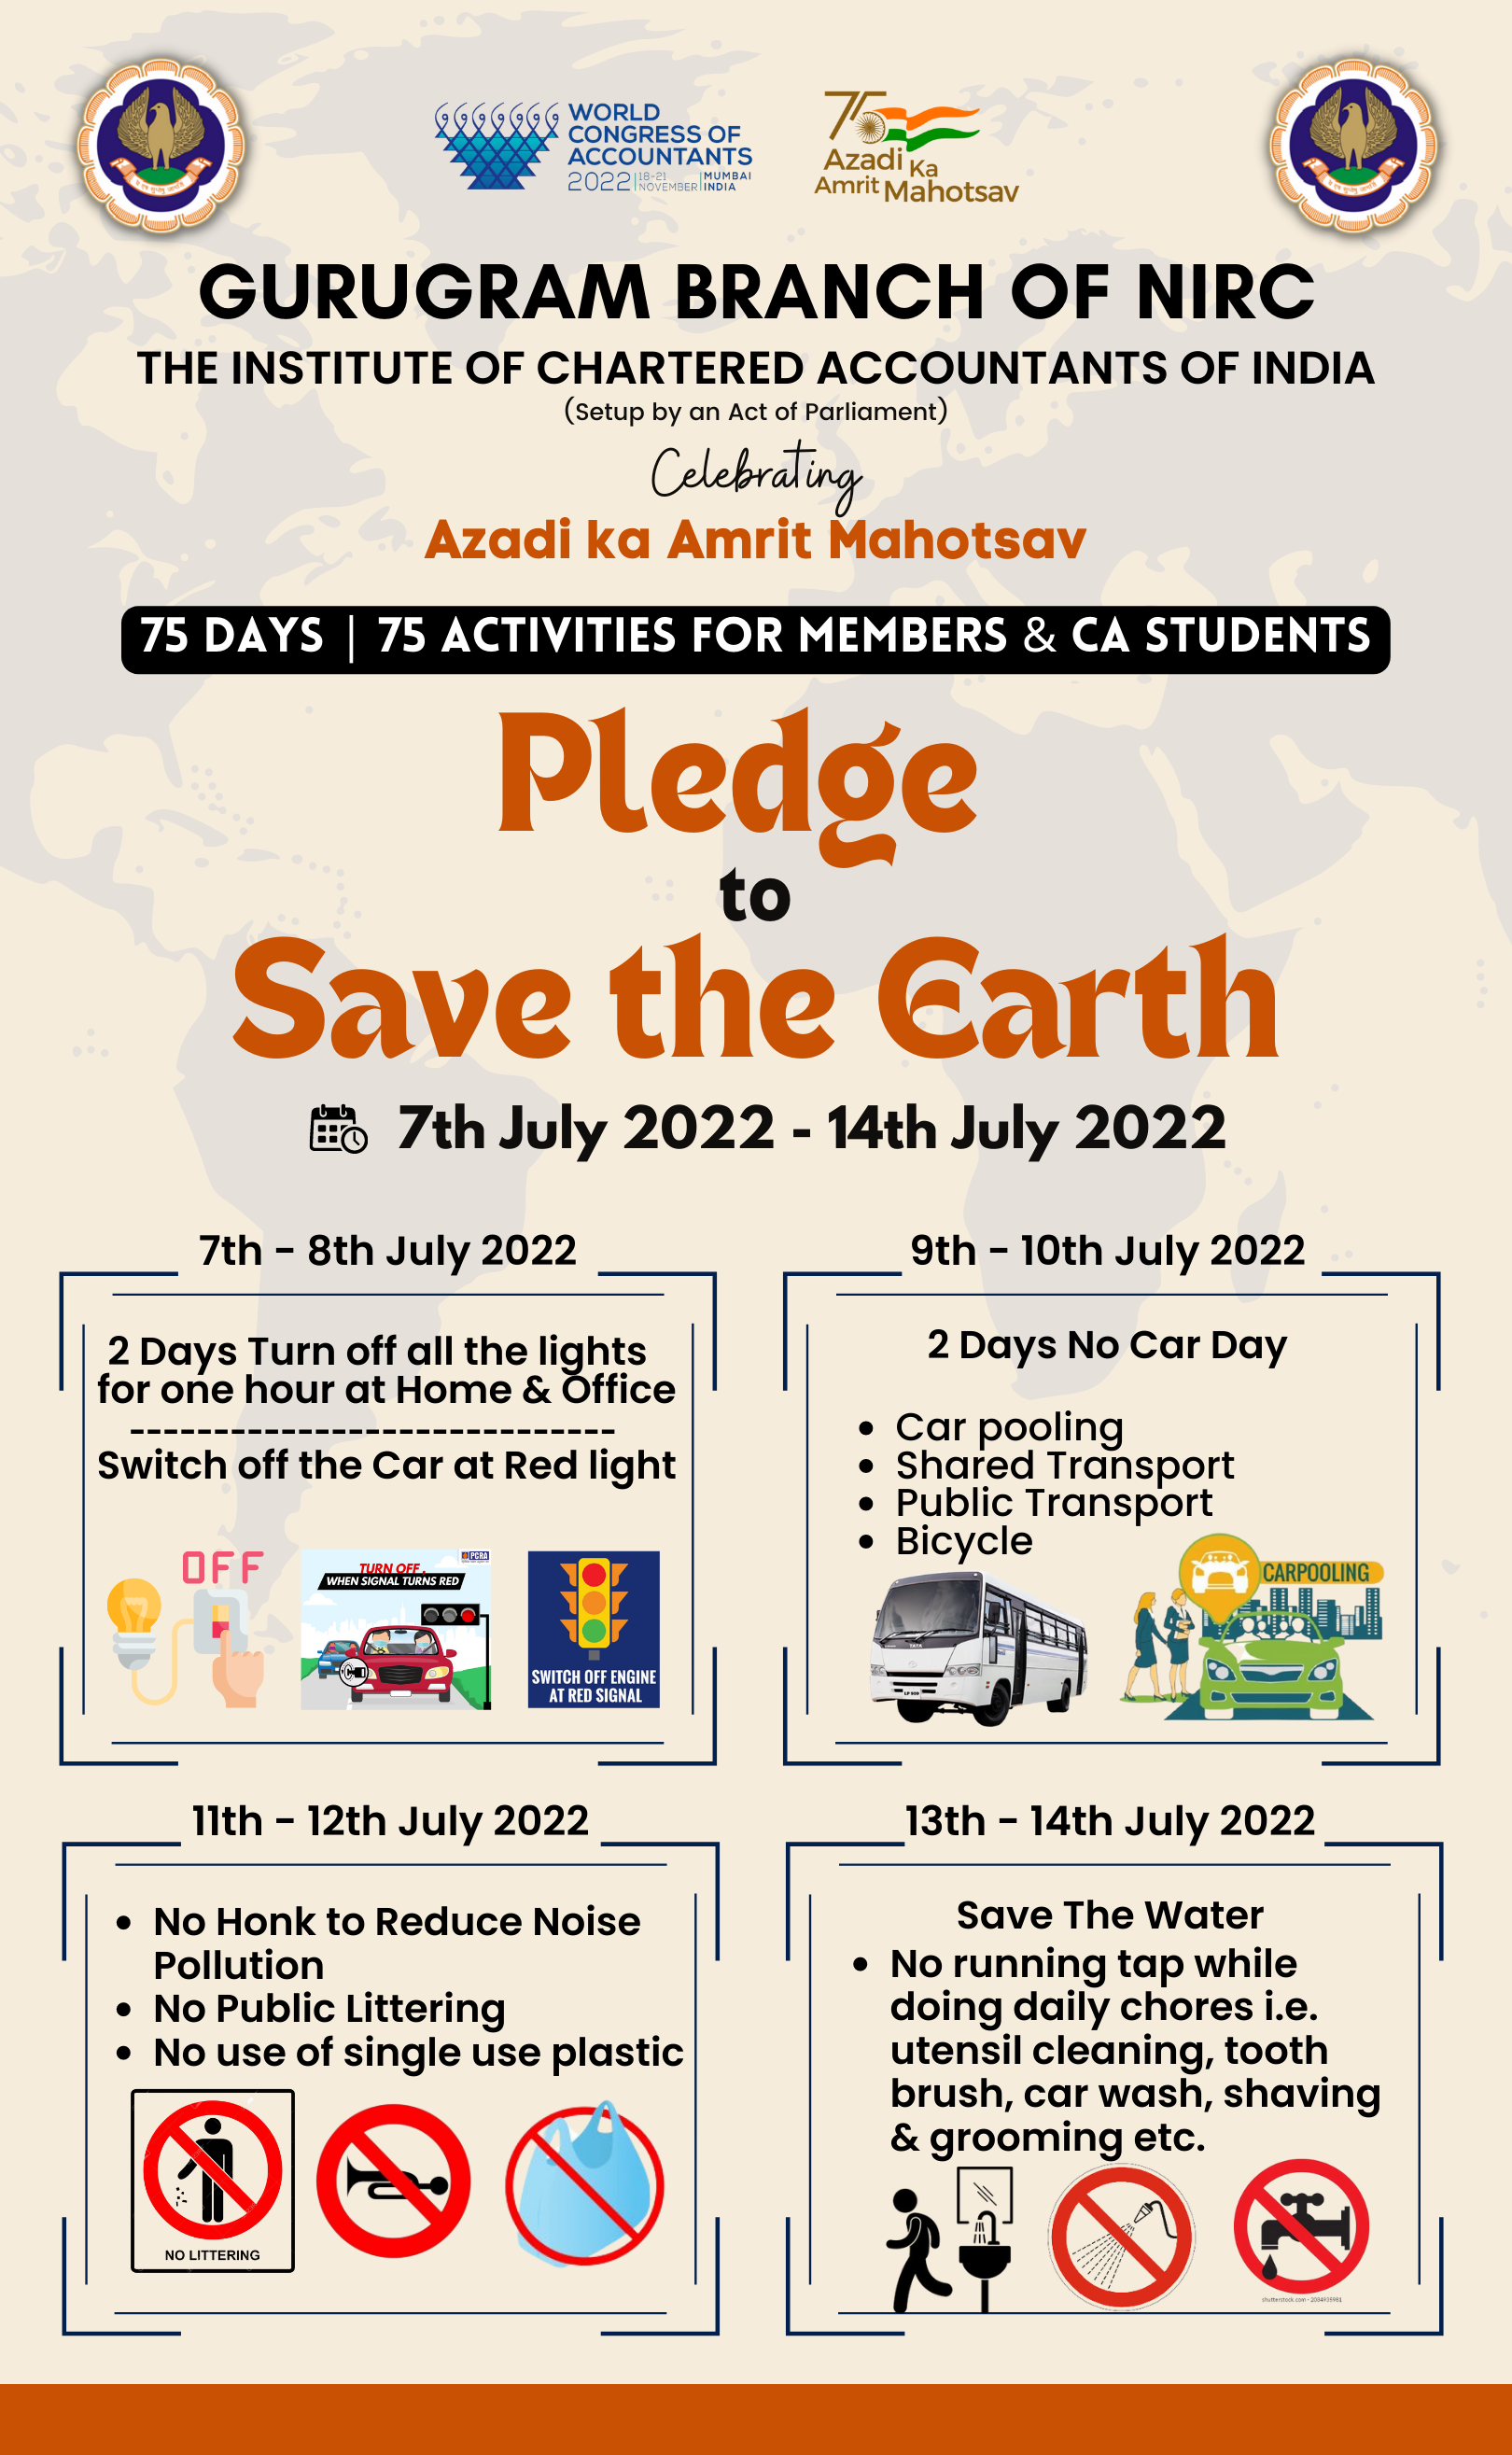 Pledge to Save the Earth